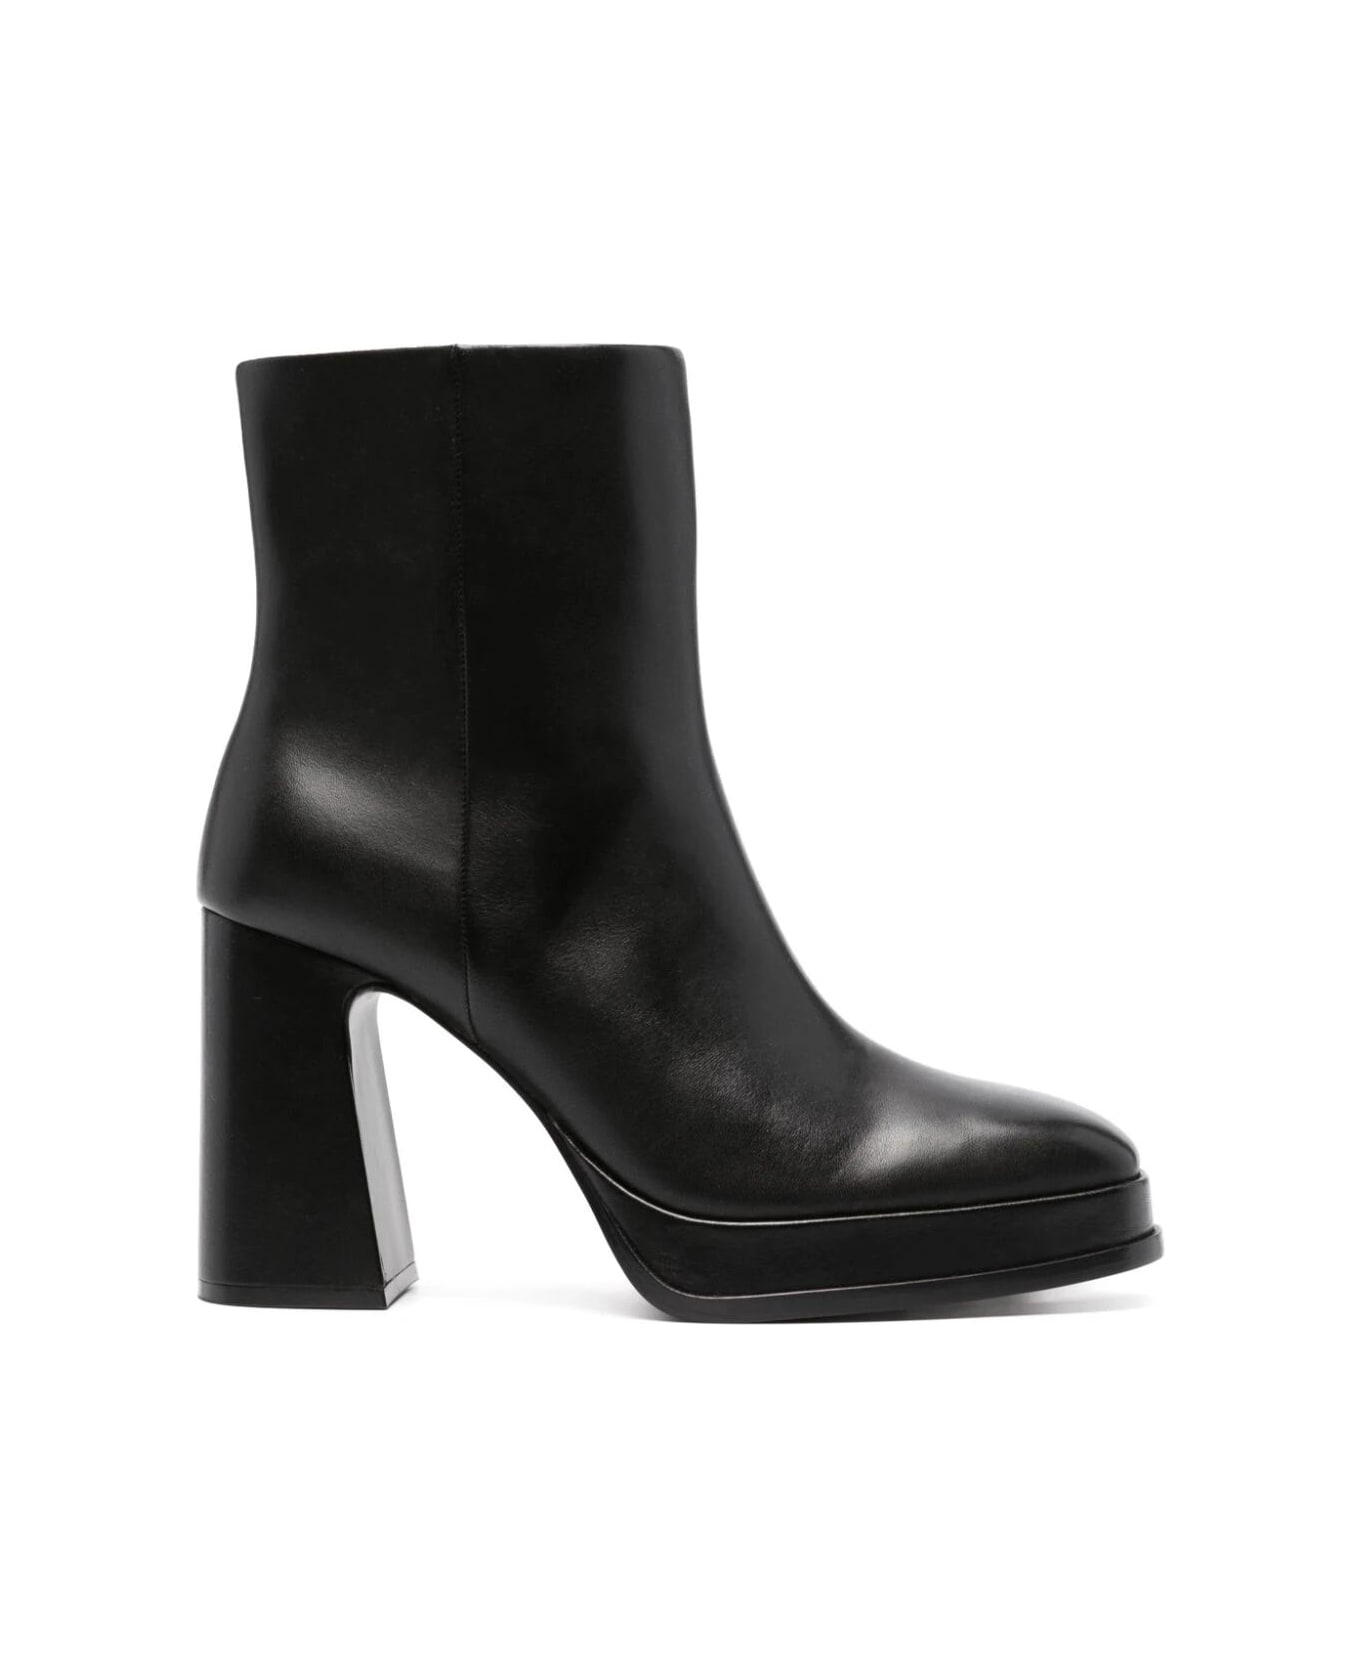 Ash Alyx Pointed Ankle Boots With Inside Zip - Black ブーツ